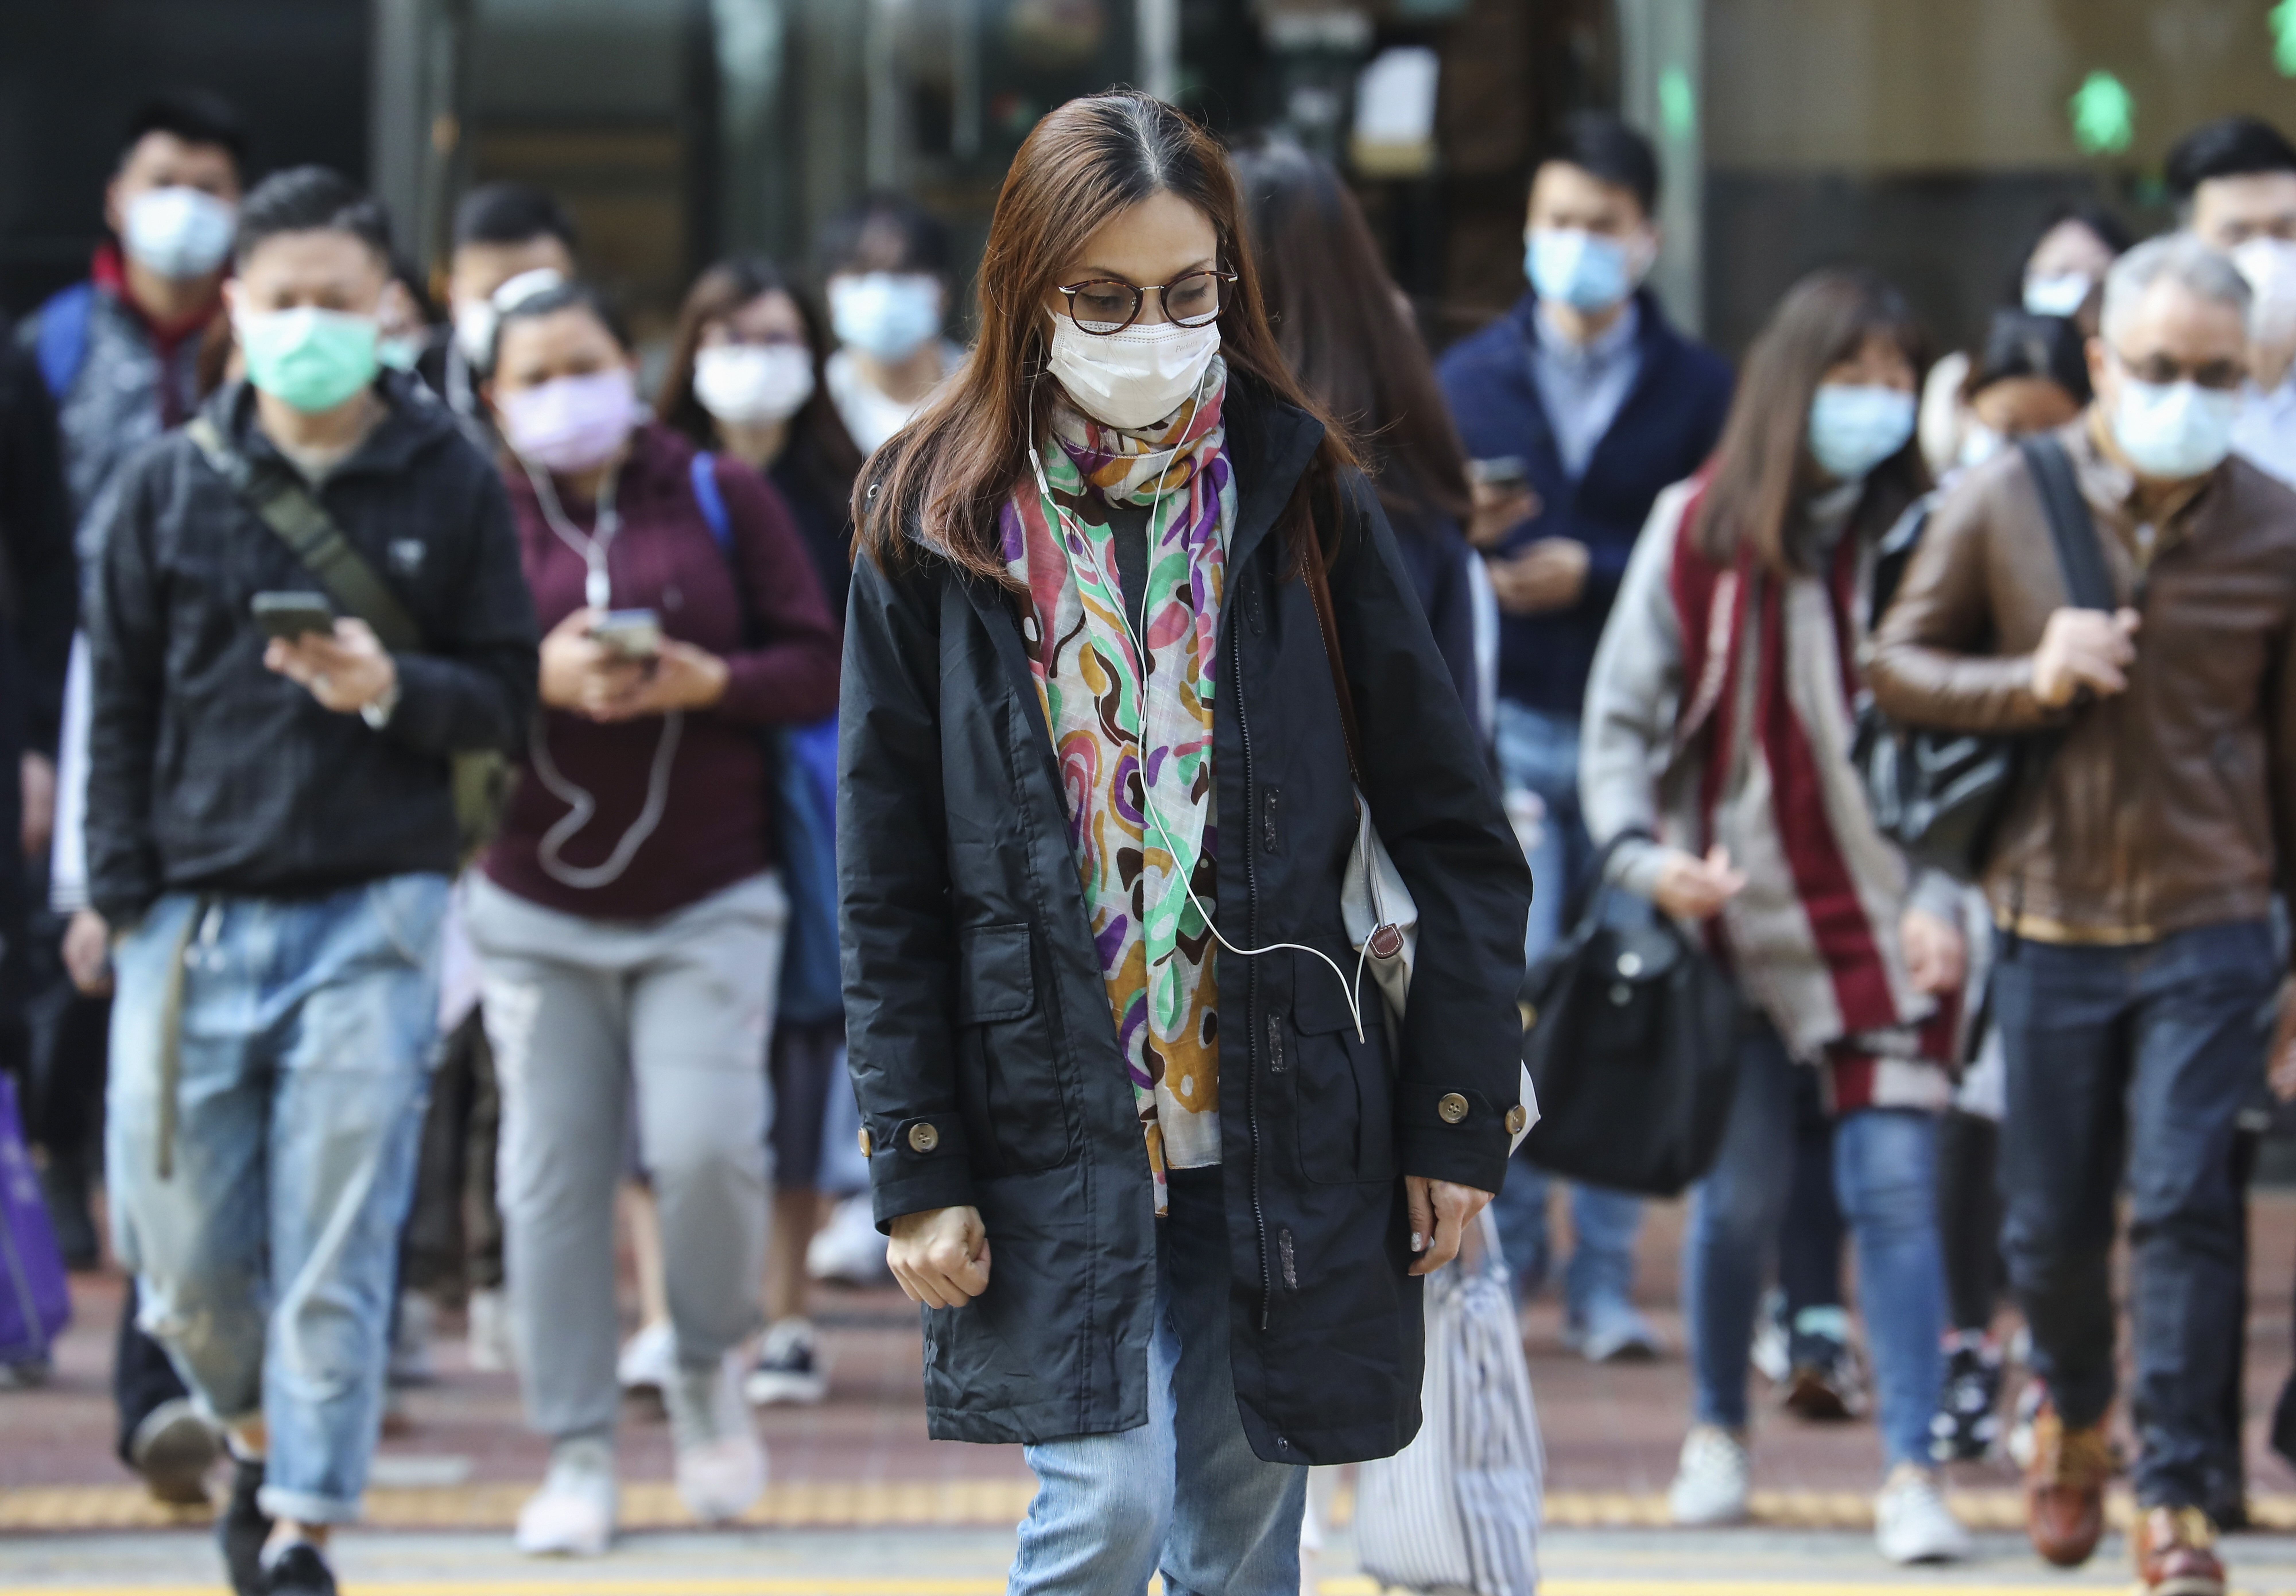 While forecasters have predicted cooler temperatures this weekend, a weather expert says Hongkongers don’t need warm coats just yet. Photo: Xiaomei Chen